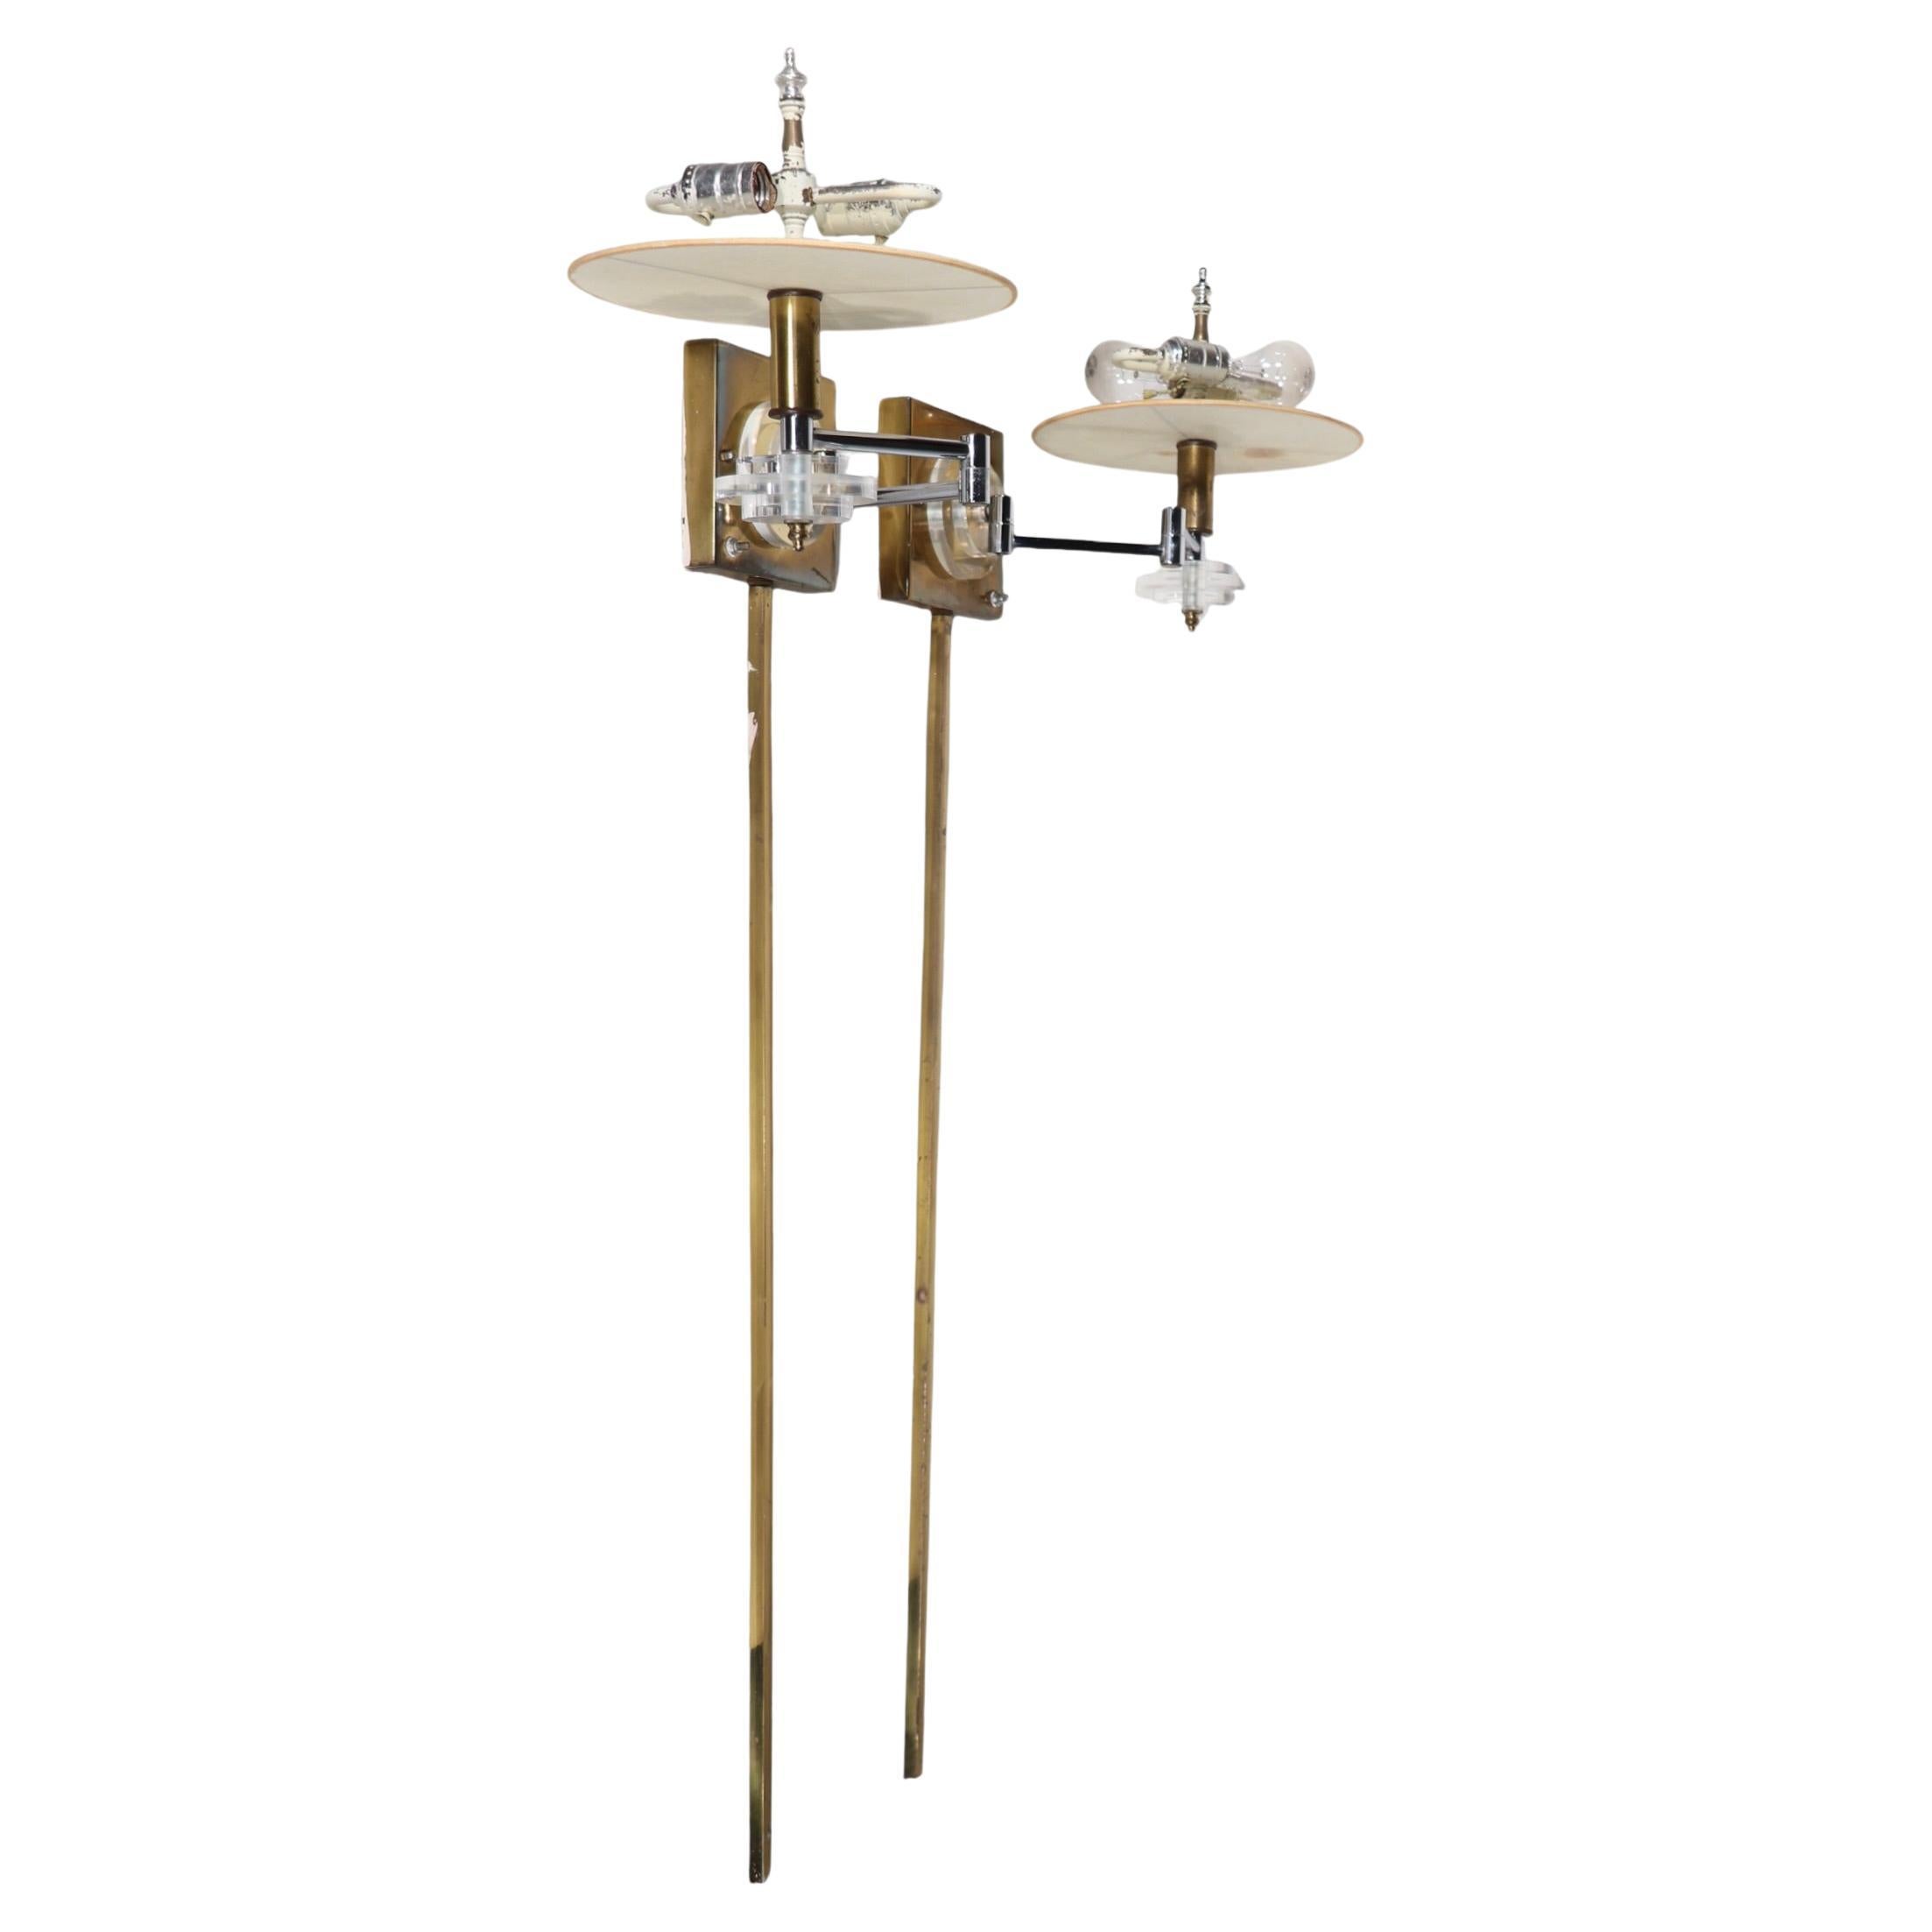 Pair of glamorous Hollywood Regency style brass chrome and lucite flew arm sconces, attributed to Frederick Cooper, circa 1970's. The sconces feature a brass and chrome structure, with thick cast lucite disks as decorative elements. 
 Both sconces